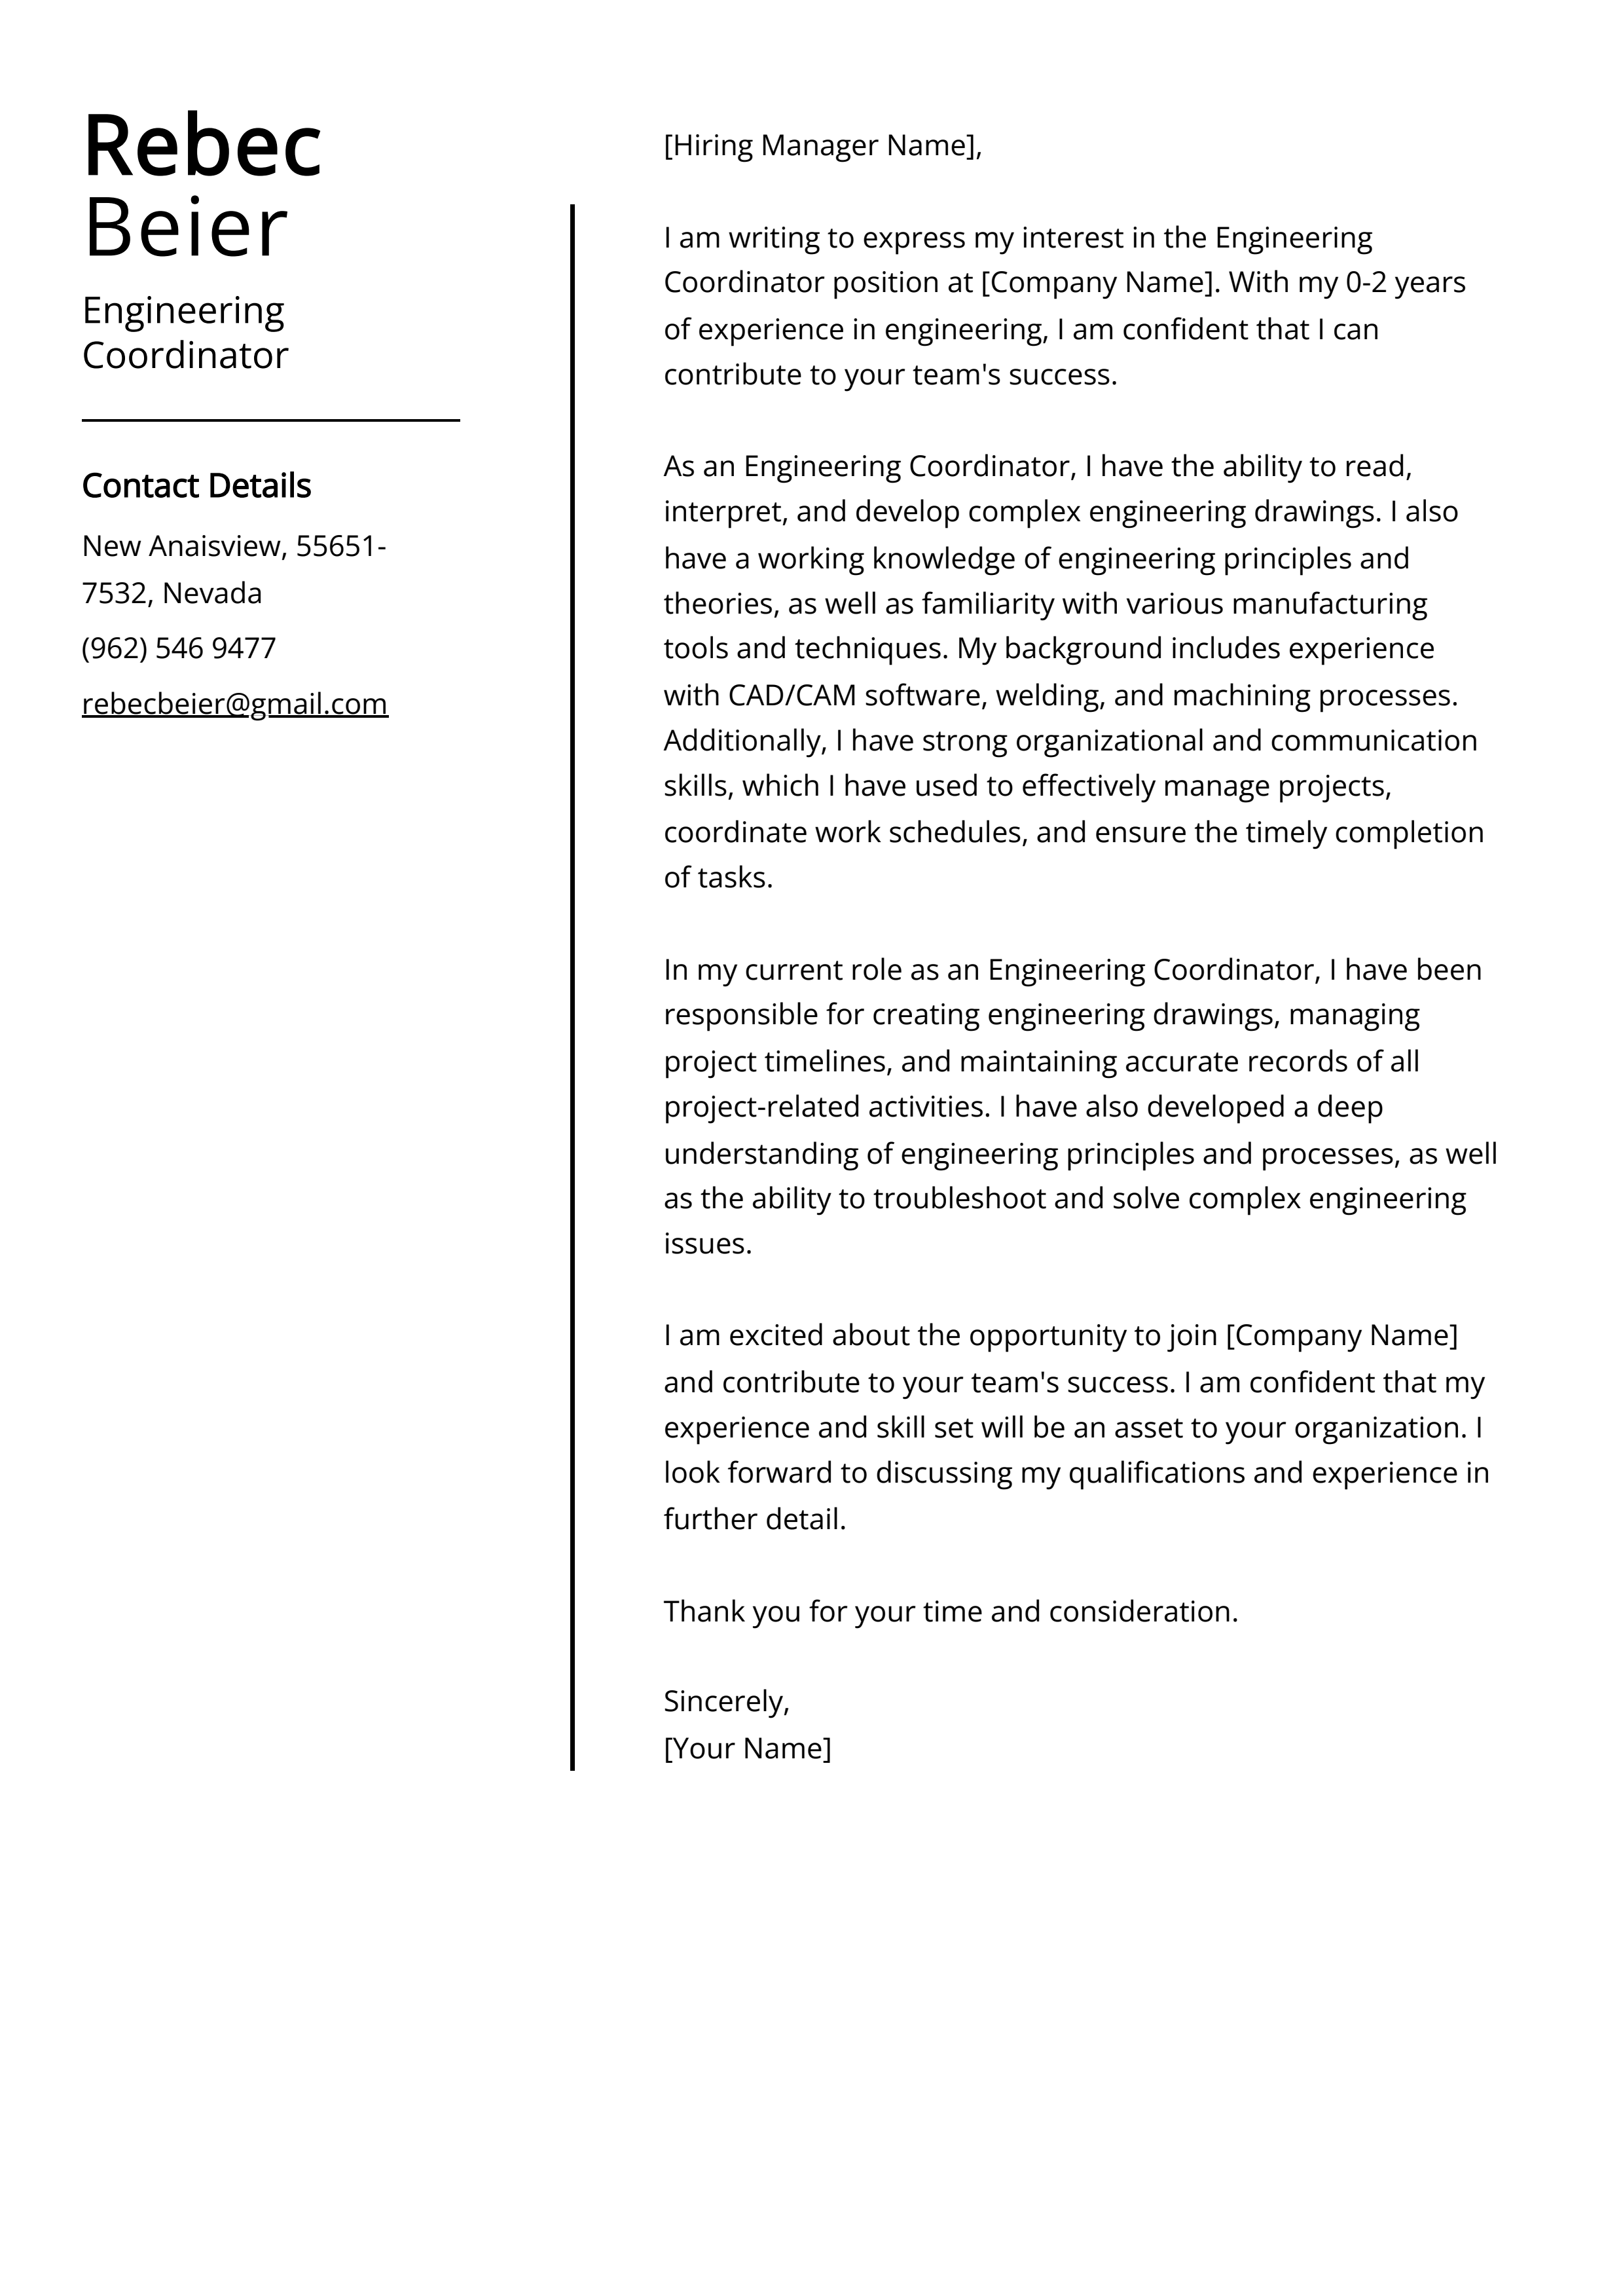 Engineering Coordinator Cover Letter Example